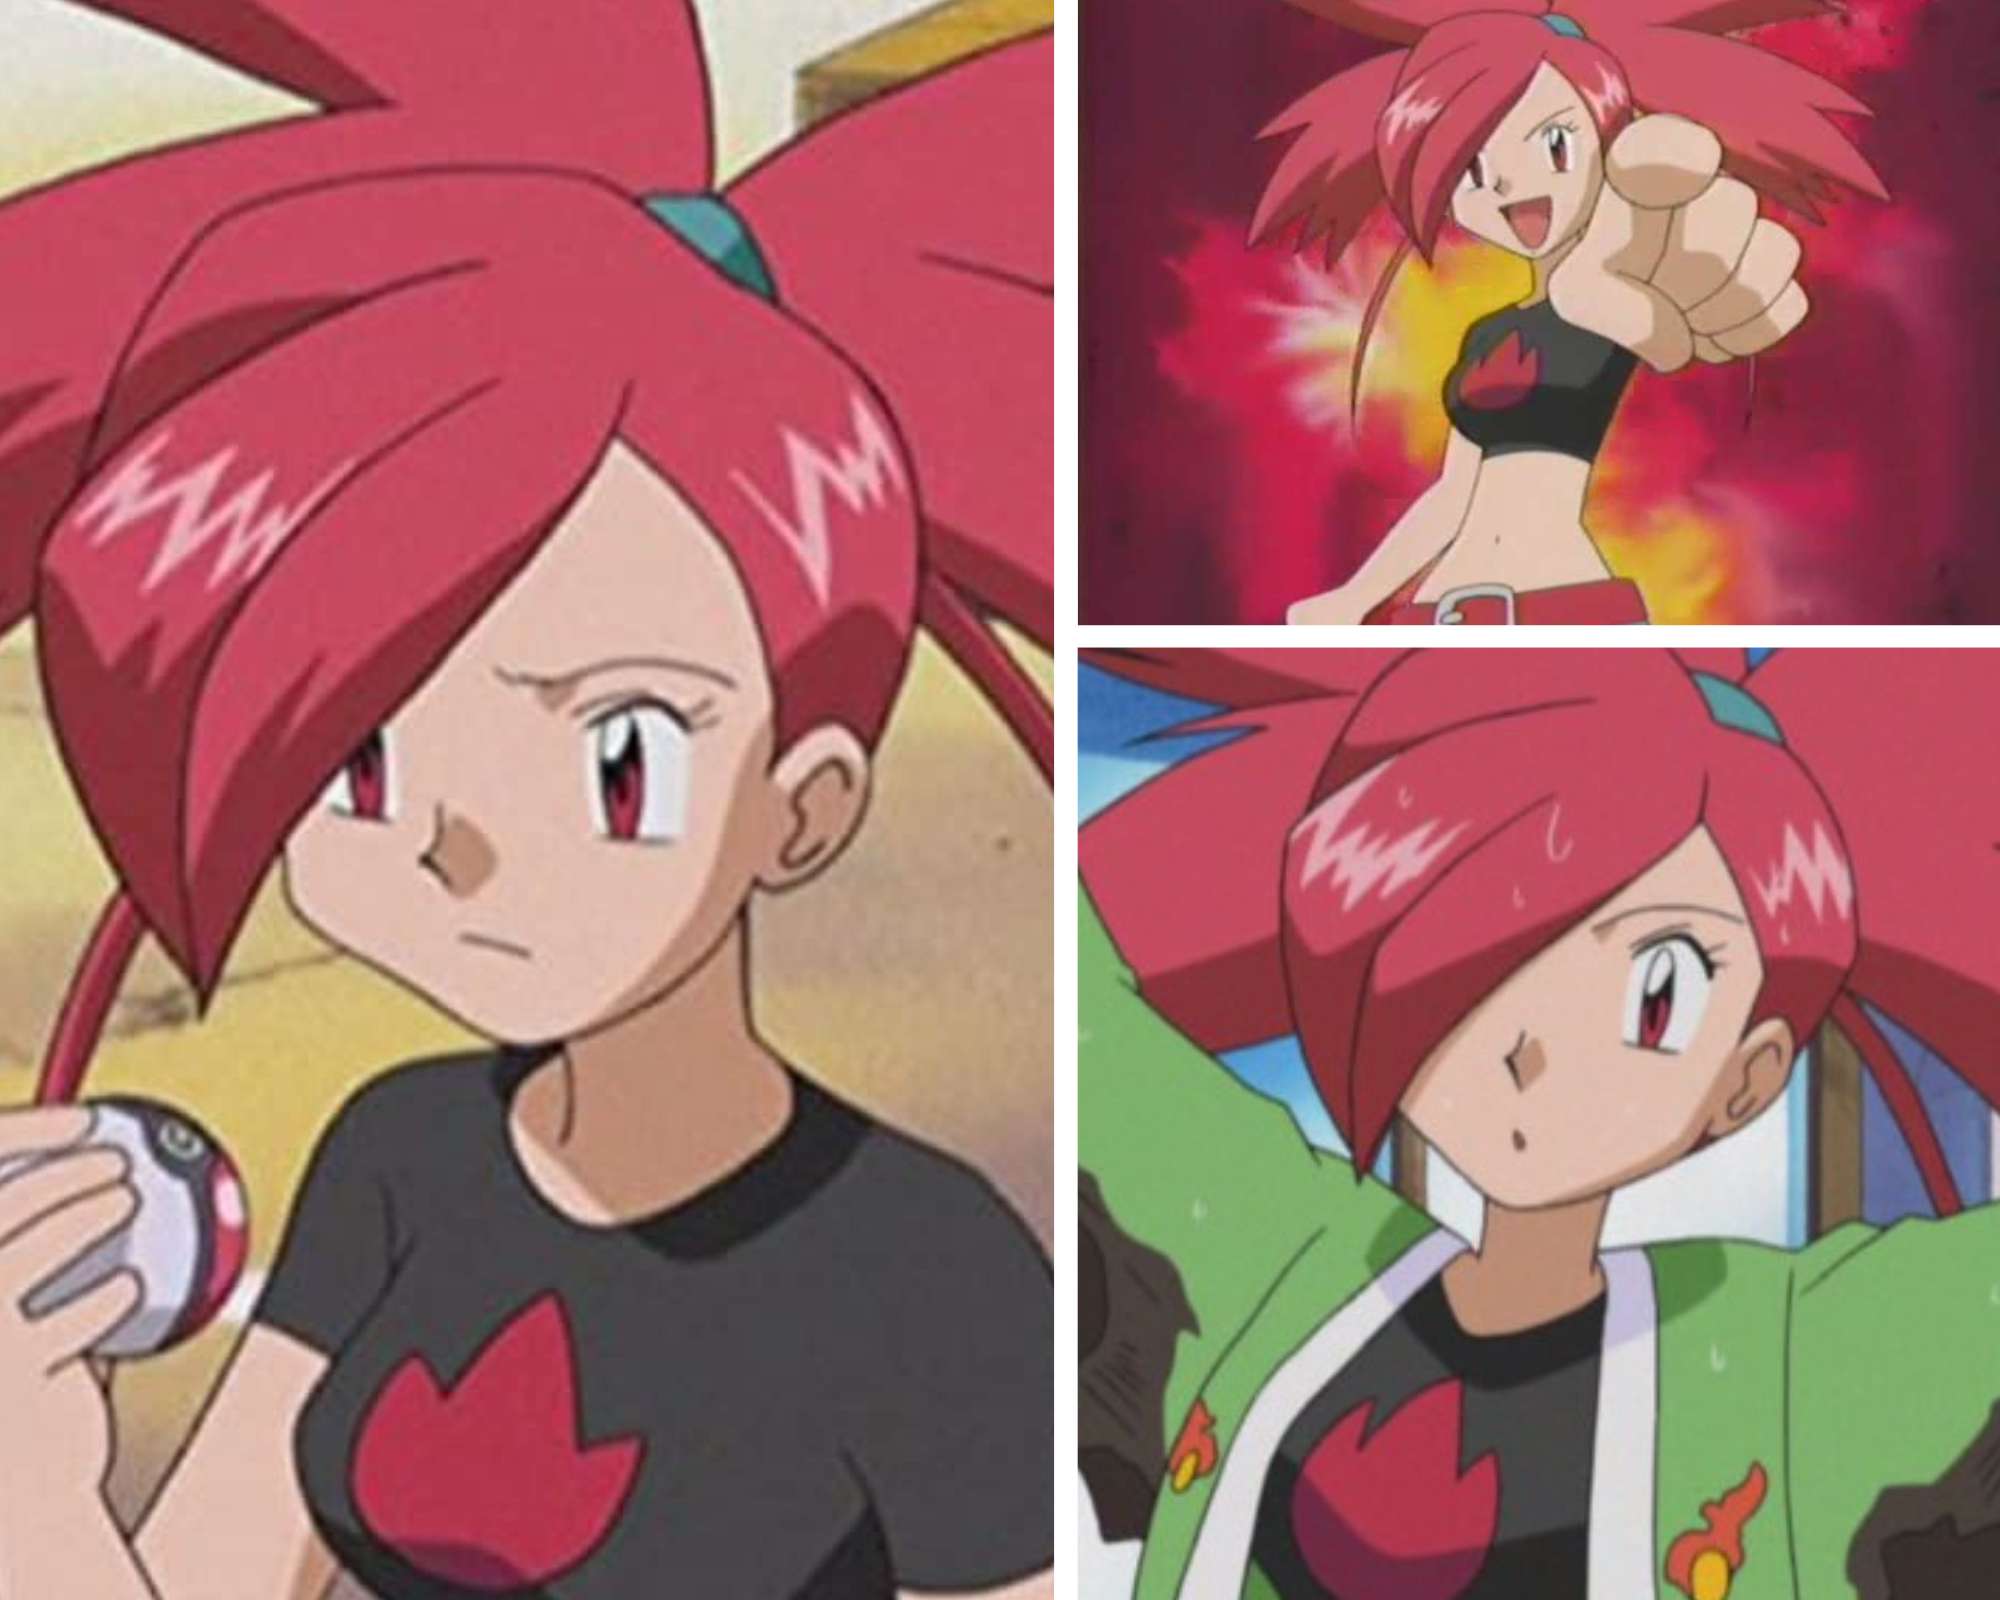 Flannery with Red Spiky Hair